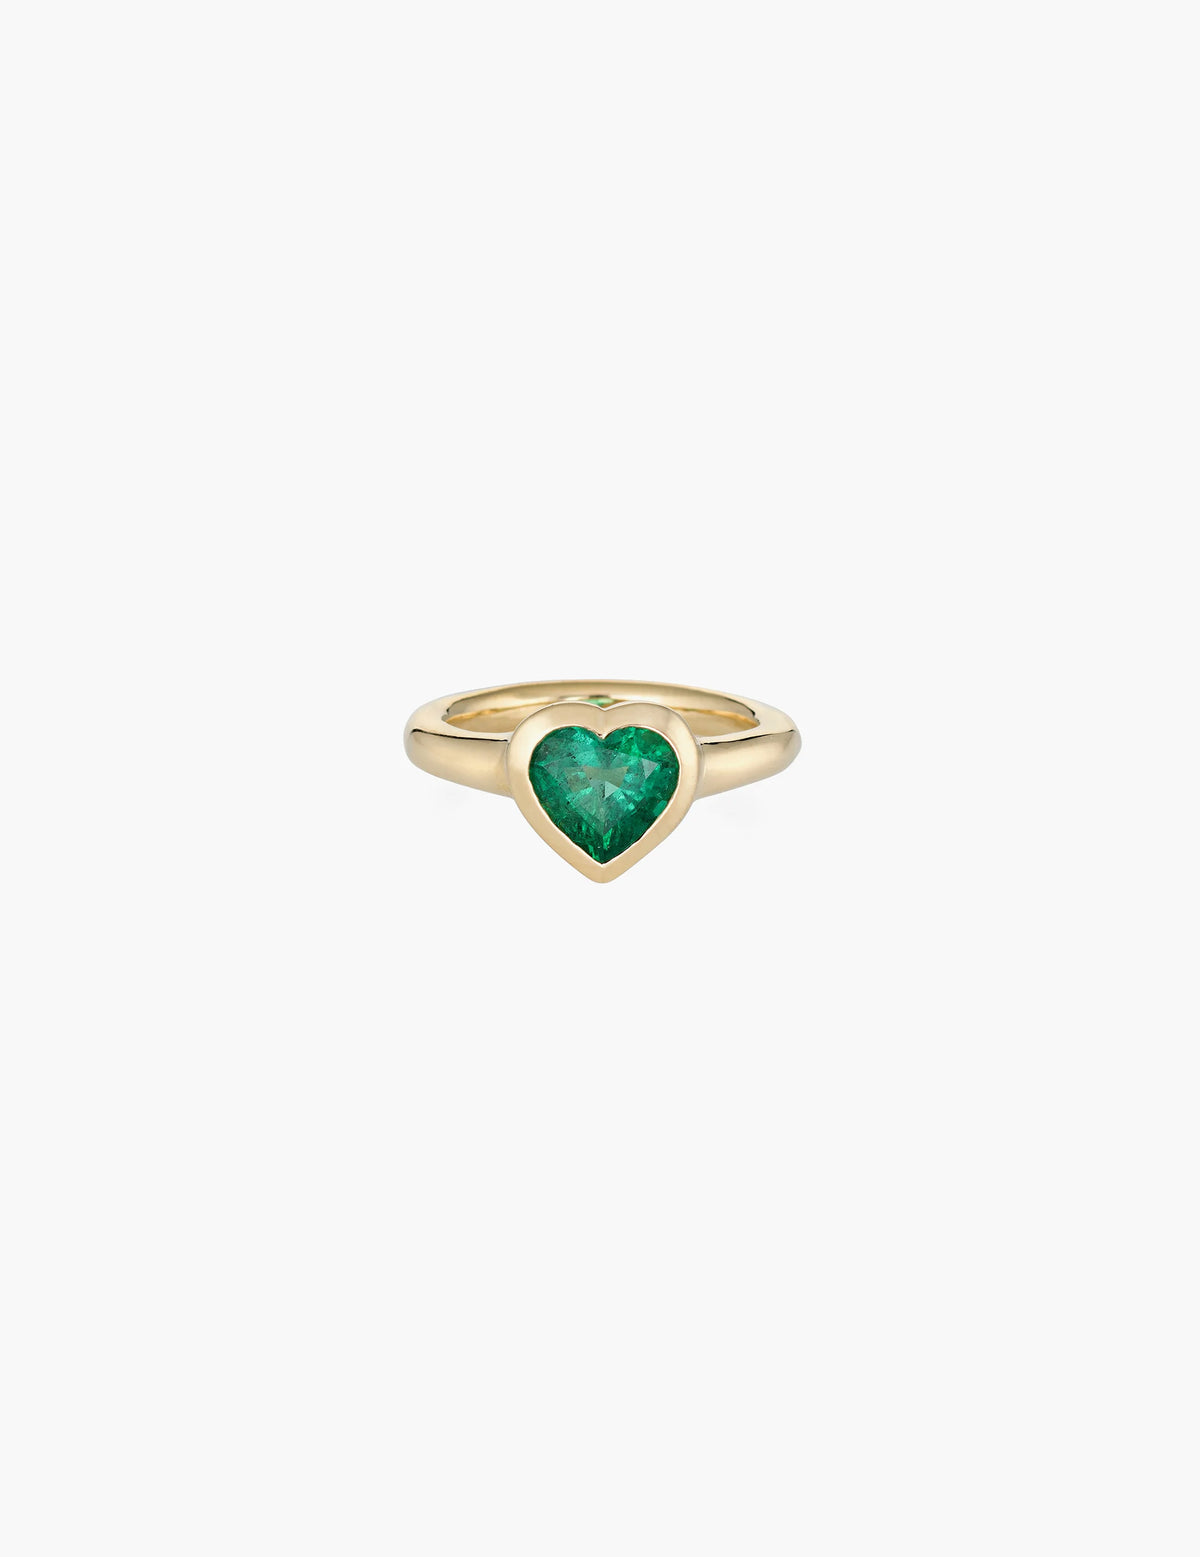 Large emerald heart ring